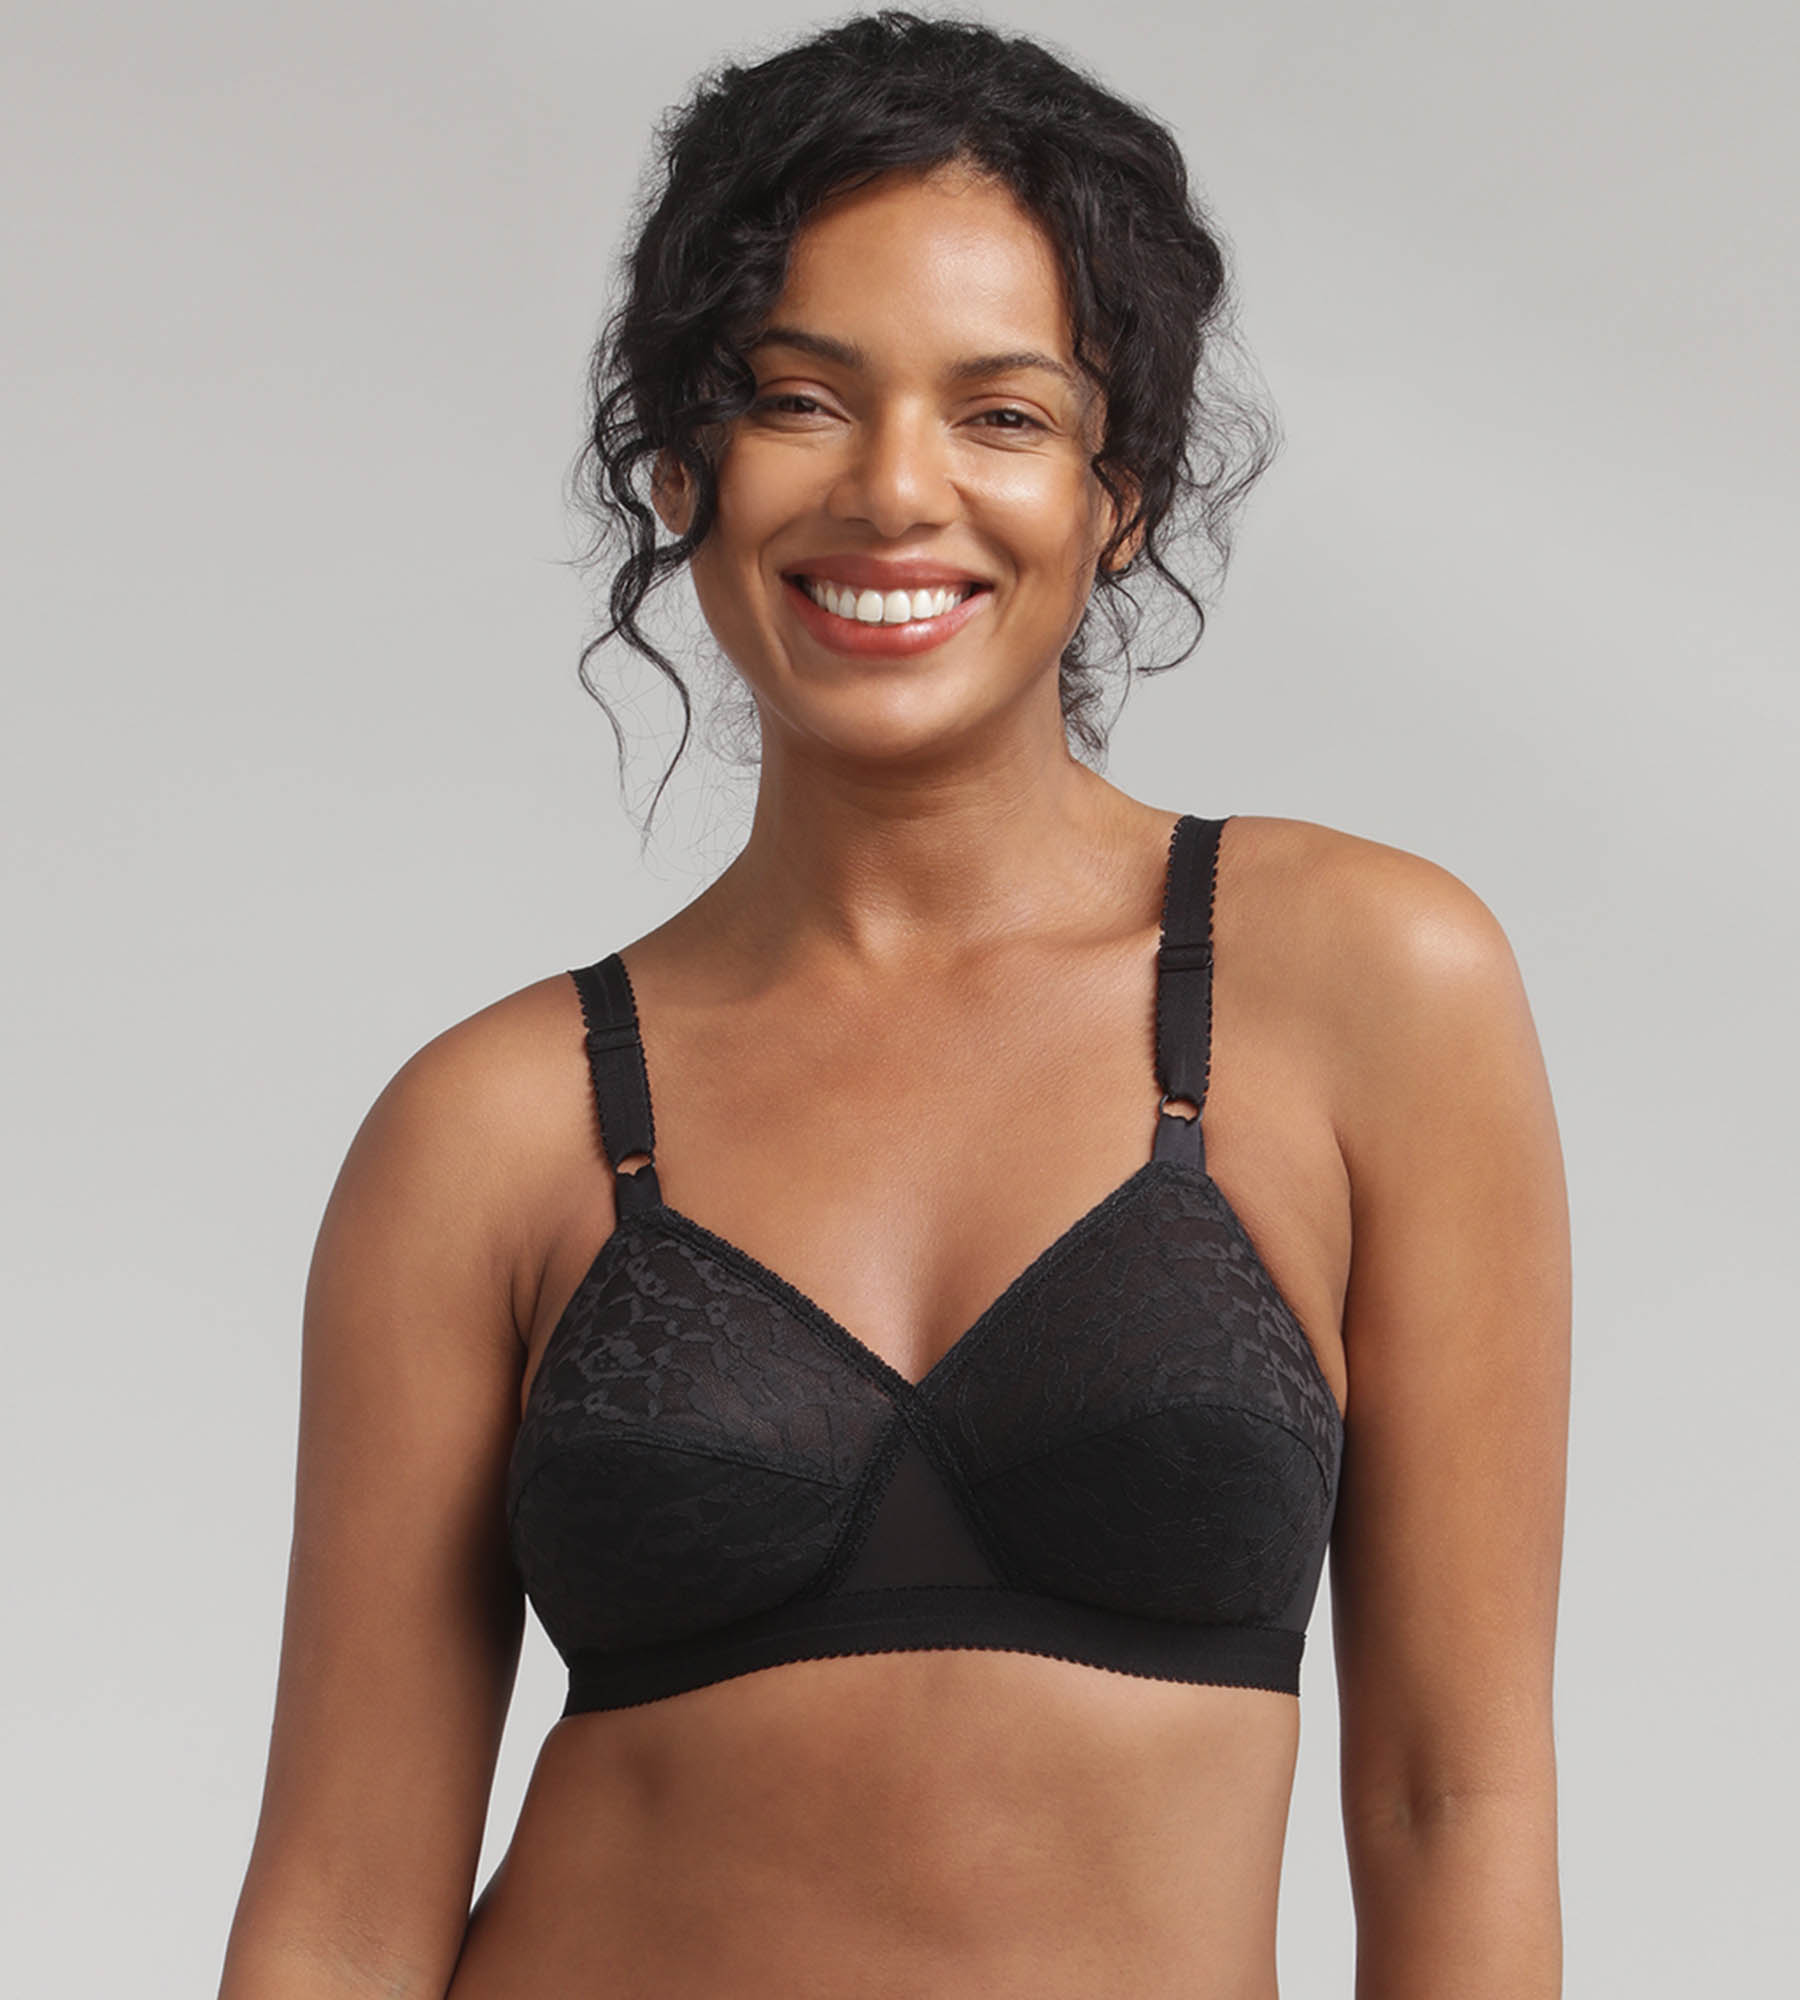 White non-wired bra - Feel Good Support